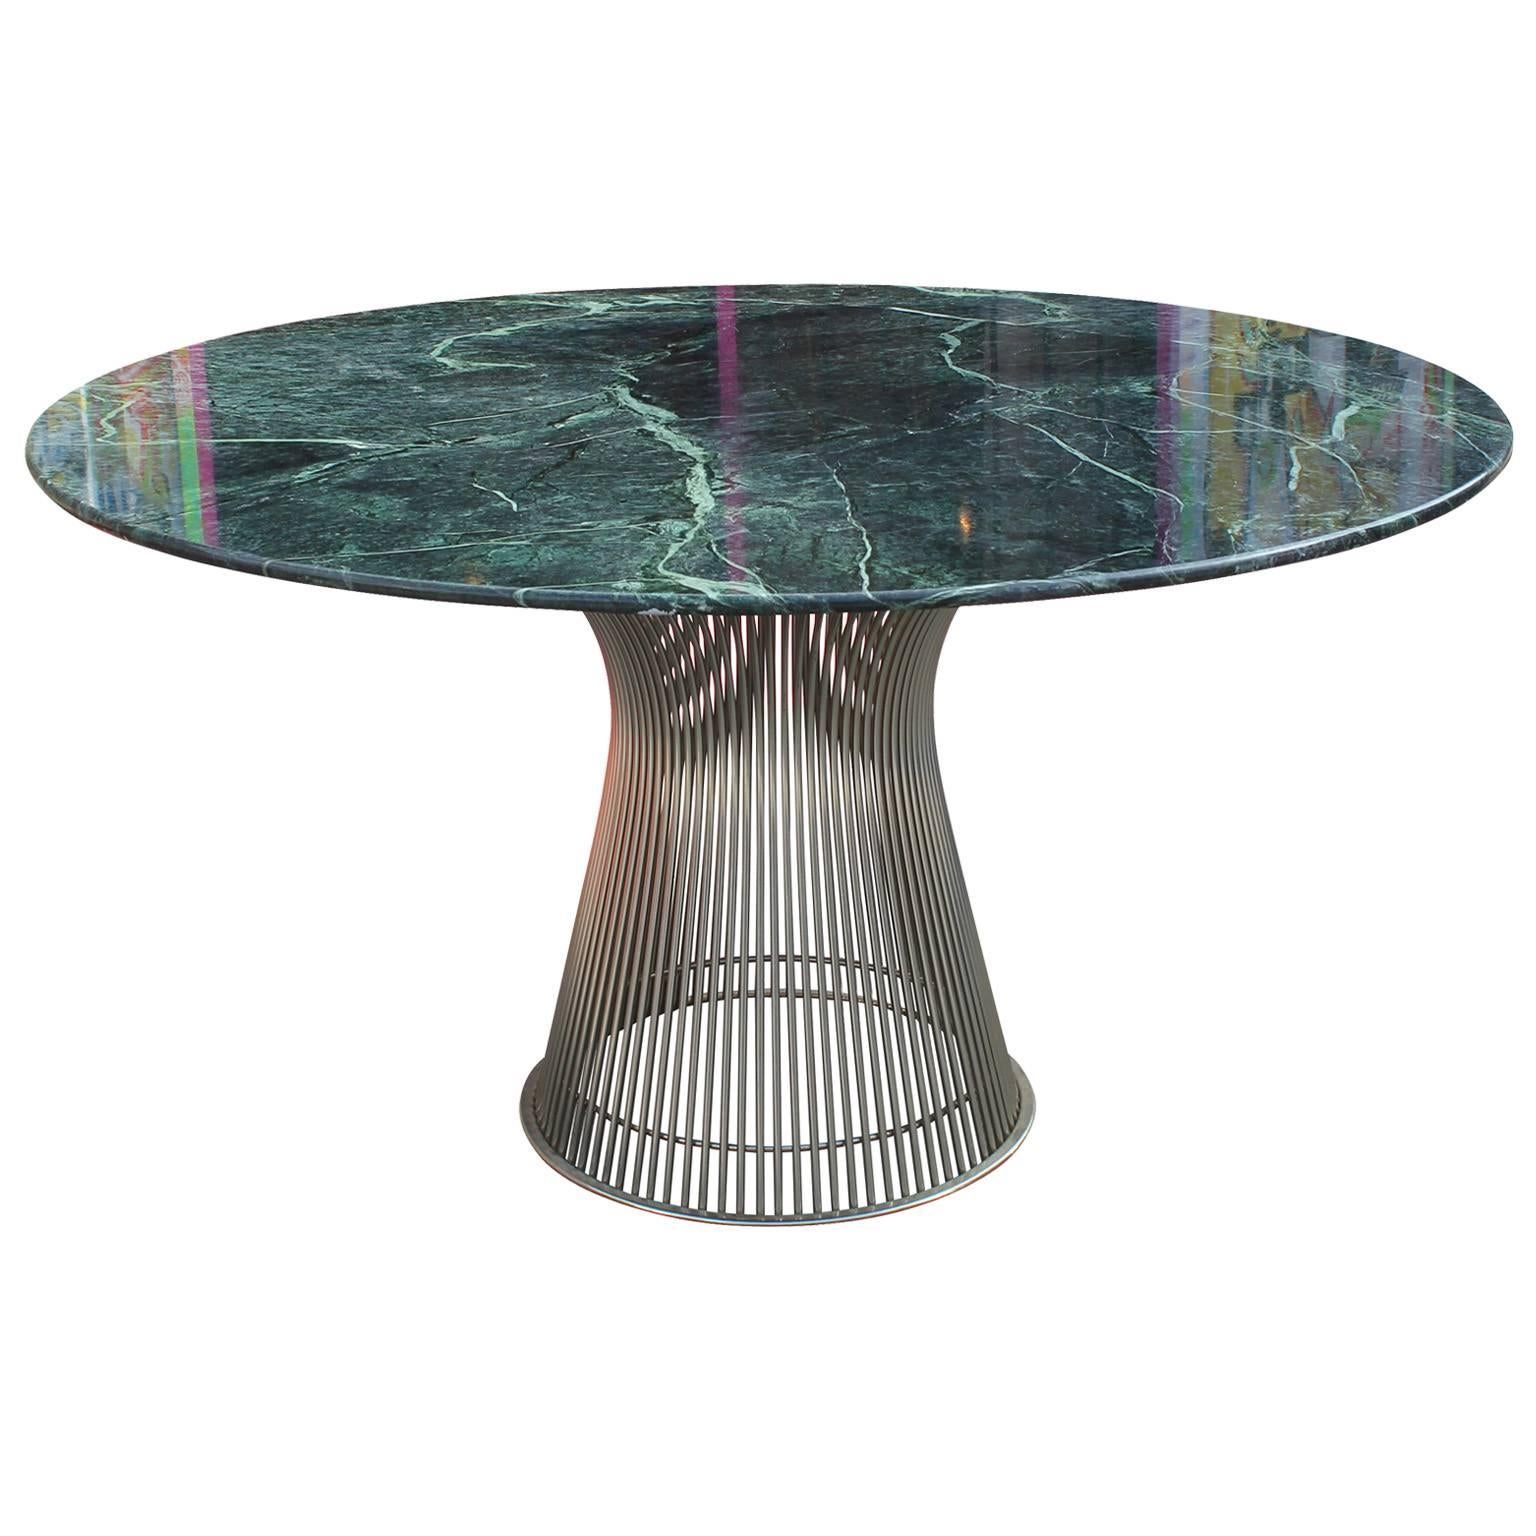 Iconic round dining table by Warren Platner for Knoll. Striking green marble top is supported by a nickel plated wire base. In nice original condition.